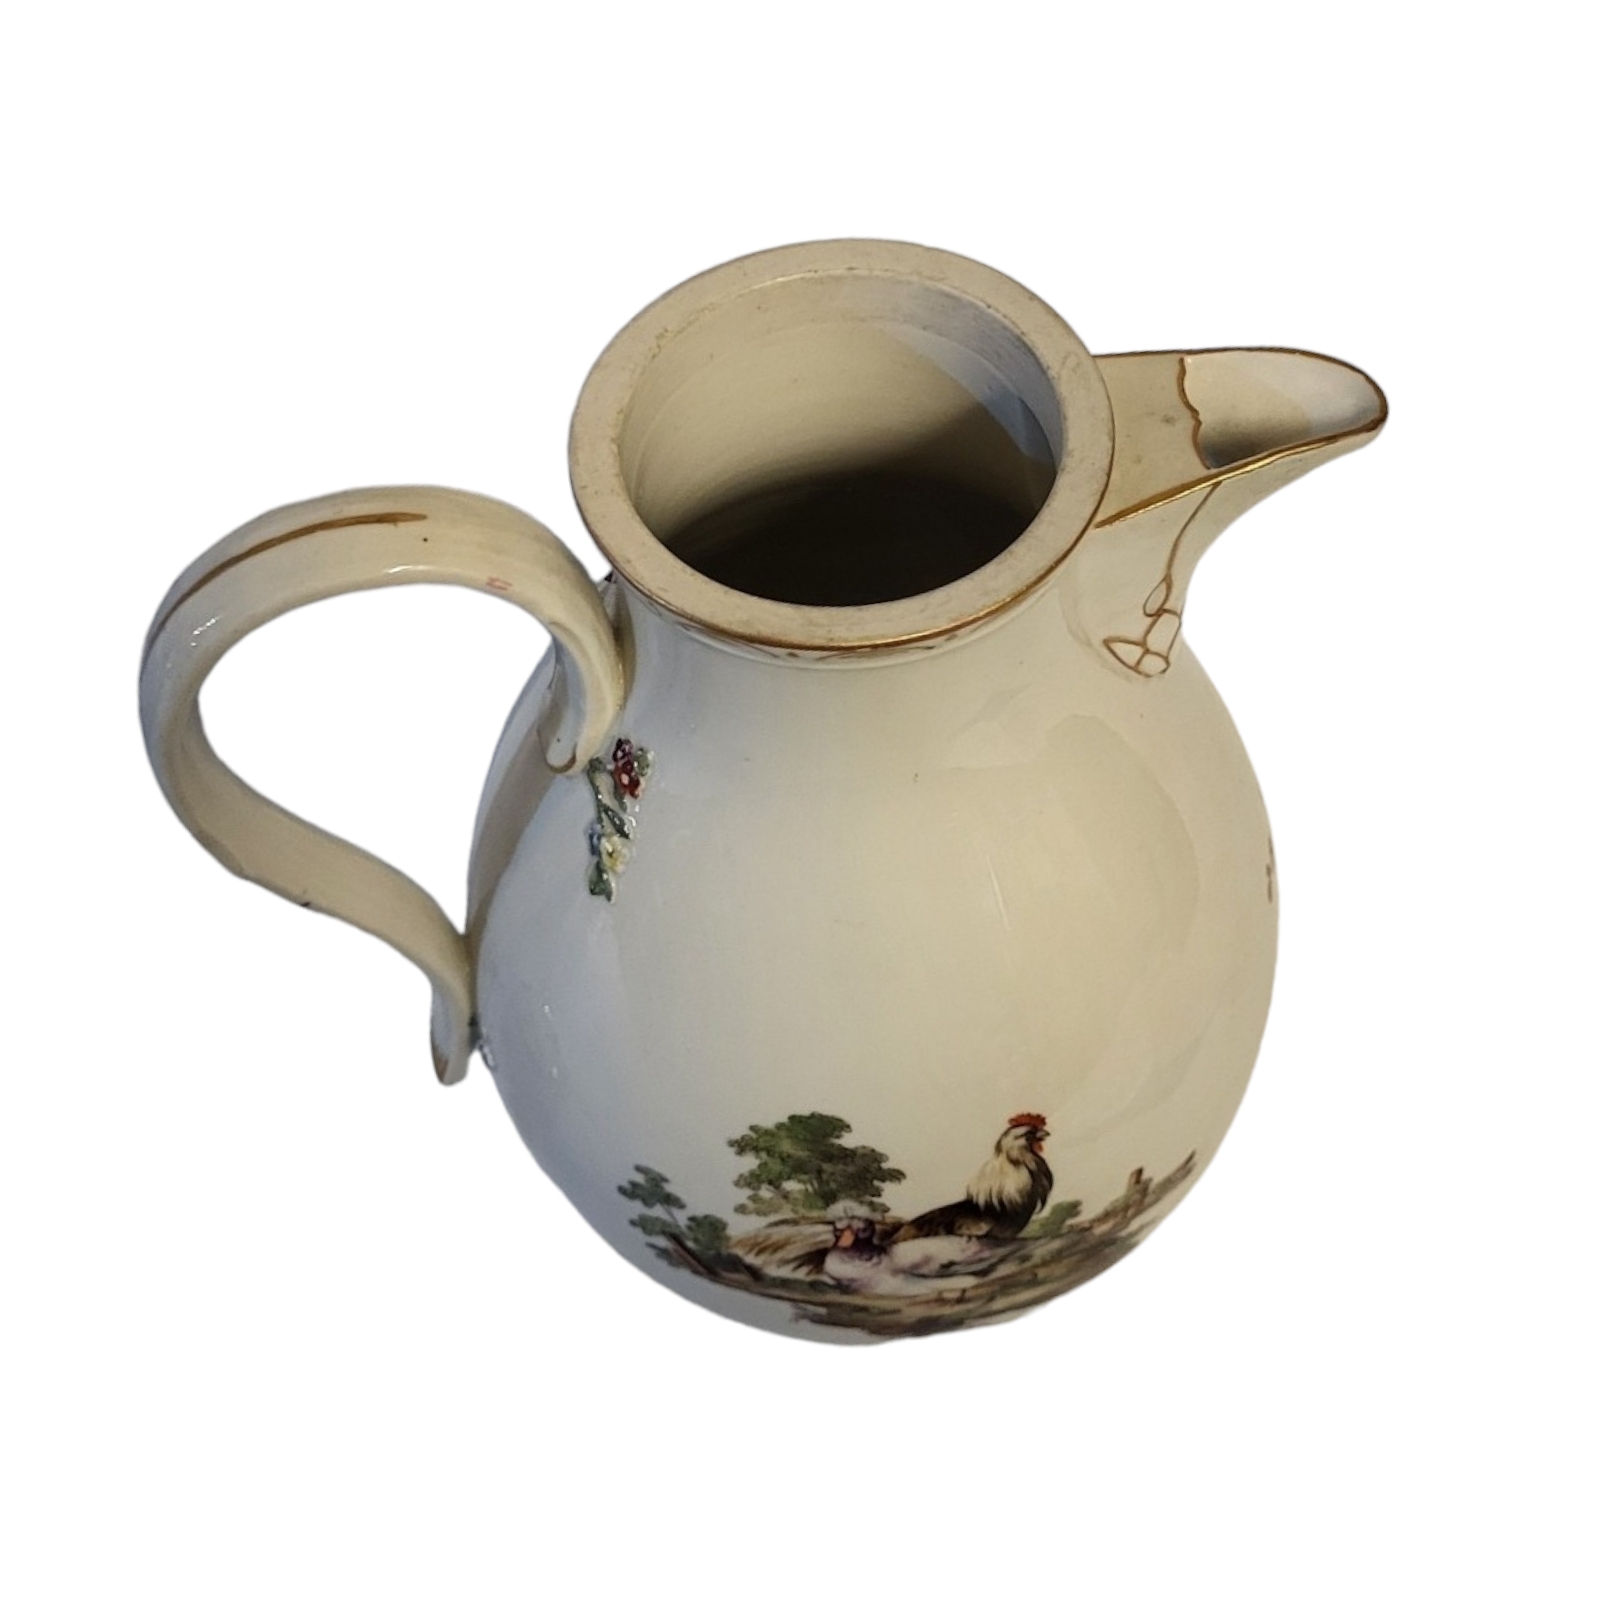 AN 19TH CENTURY DUTCH F. 1776 FACTORY, AN 18TH CENTURY MEISSEN STYLE HARD PASTE PORCELAIN COFFEE POT - Image 4 of 7